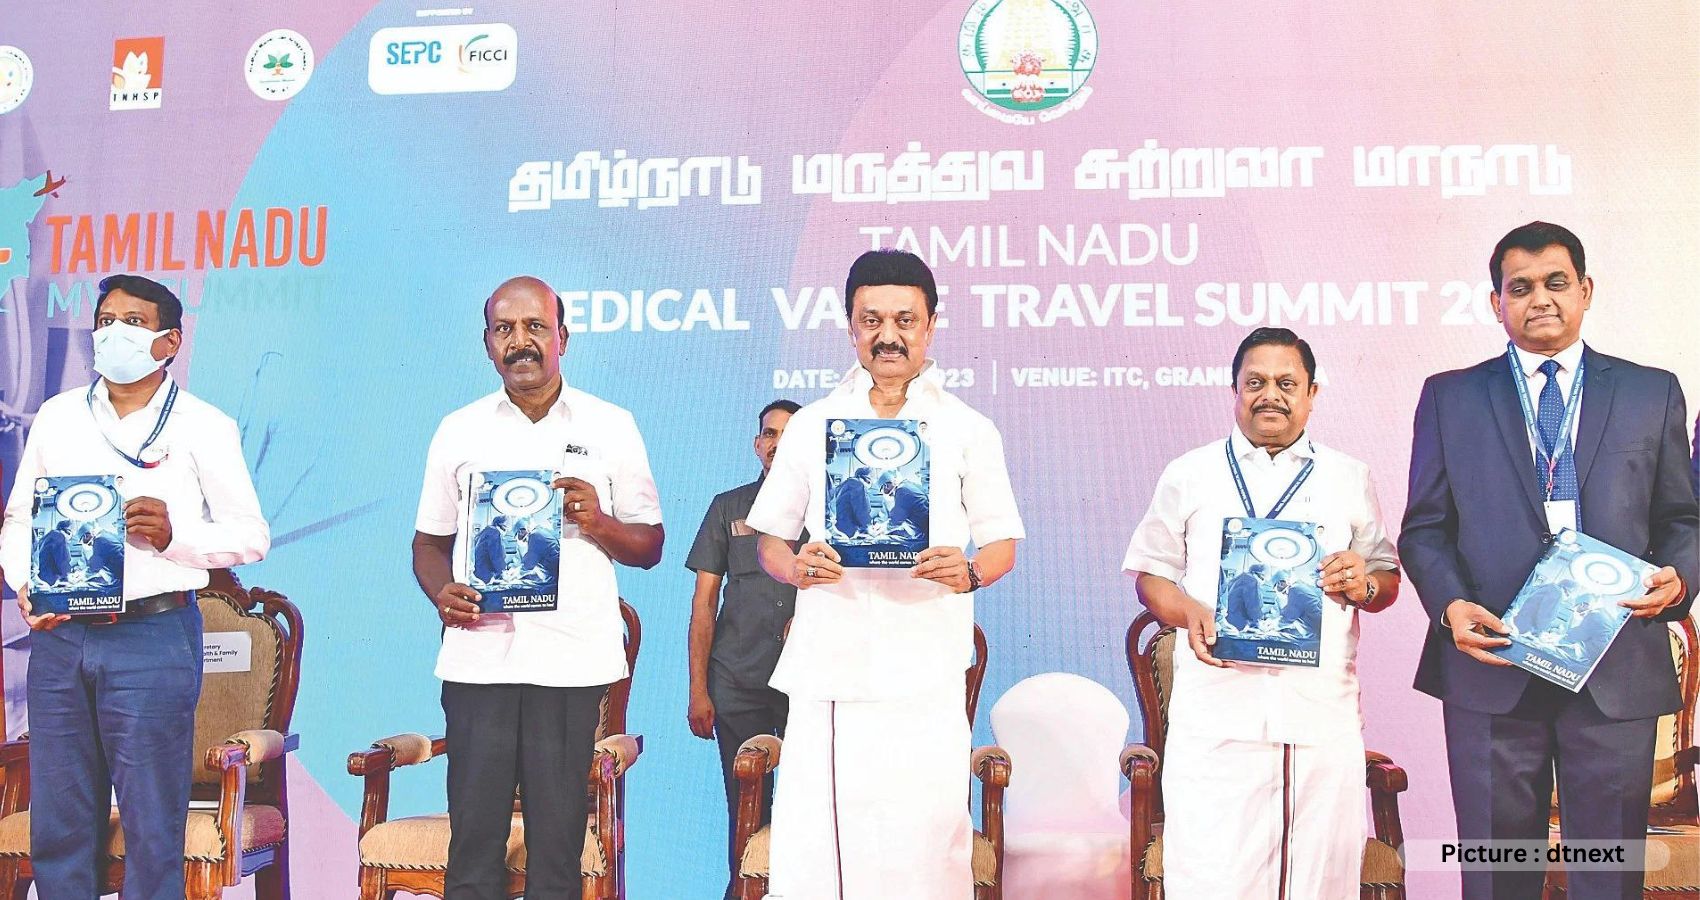 Tamil Nadu Hosts Medical Value Travel Conclave For Hospitals From 21 Countries